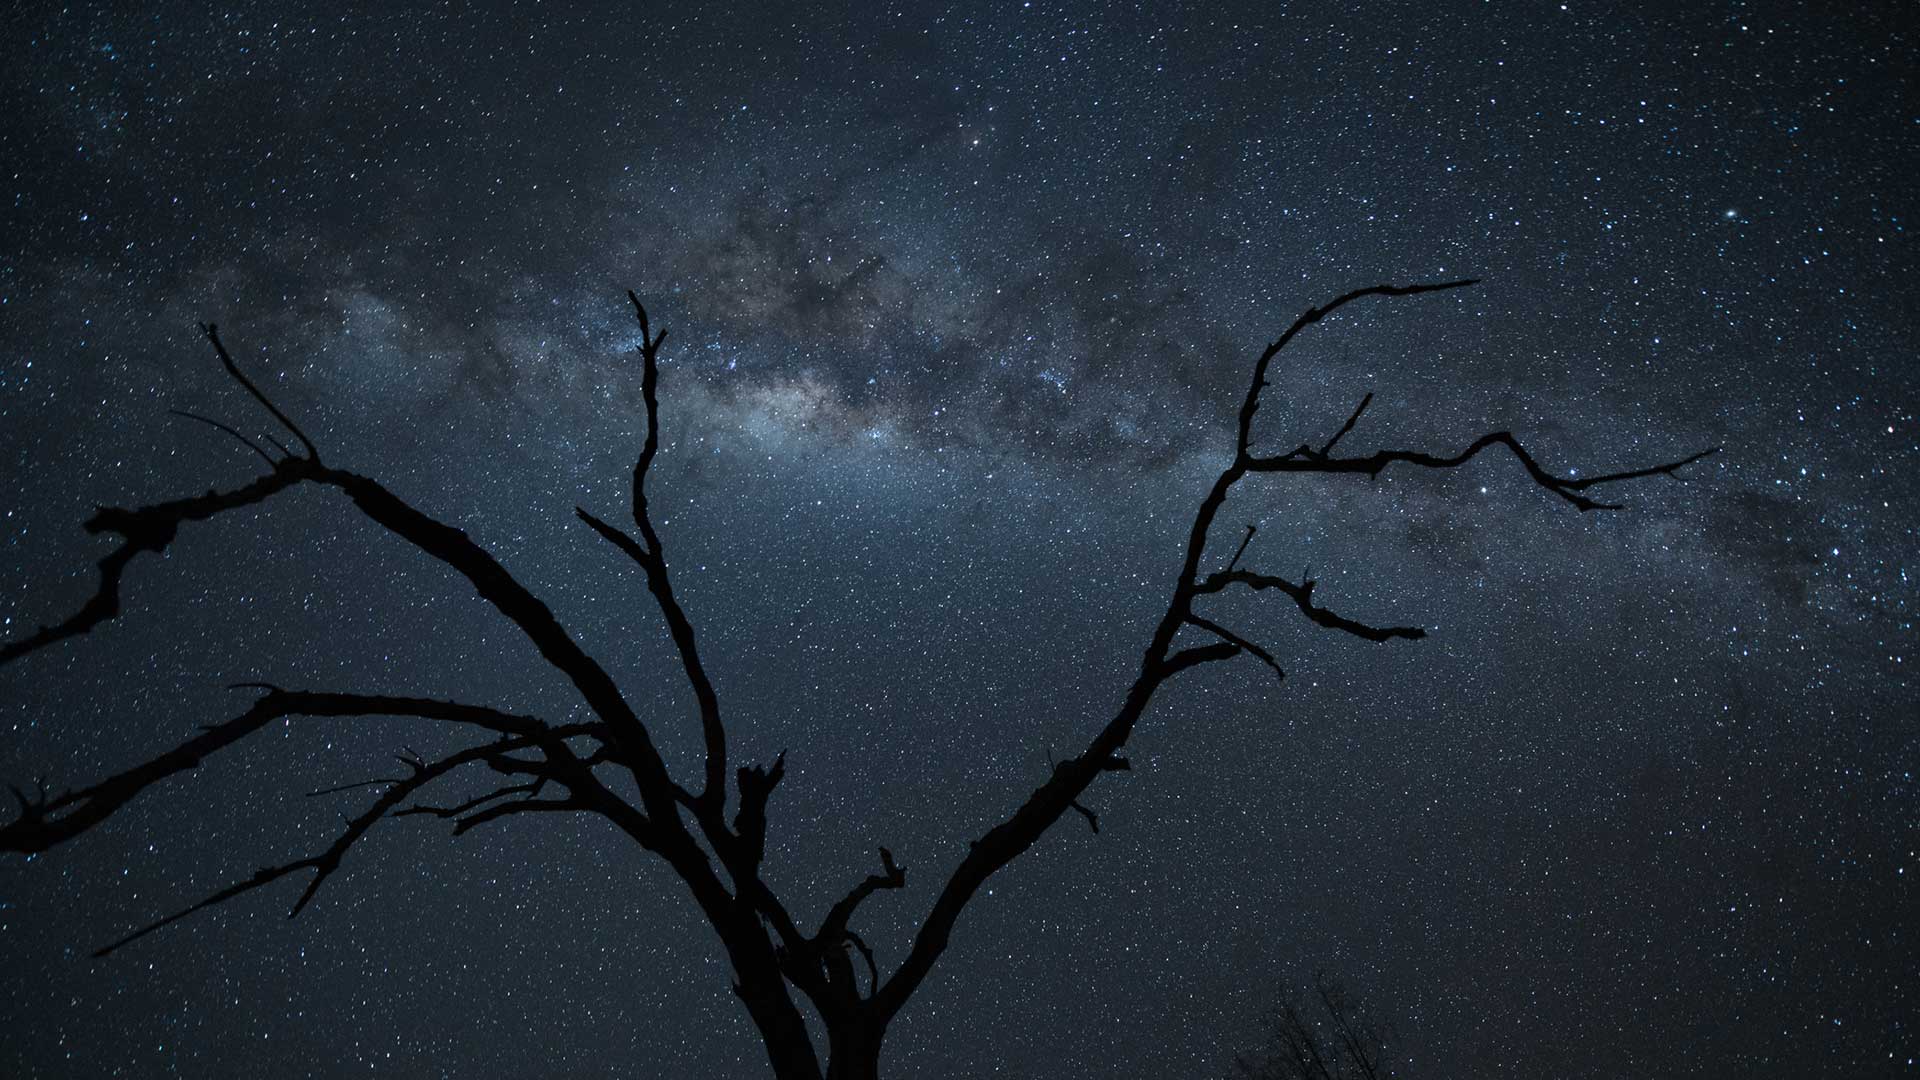 Adelaide night sky with a milky way